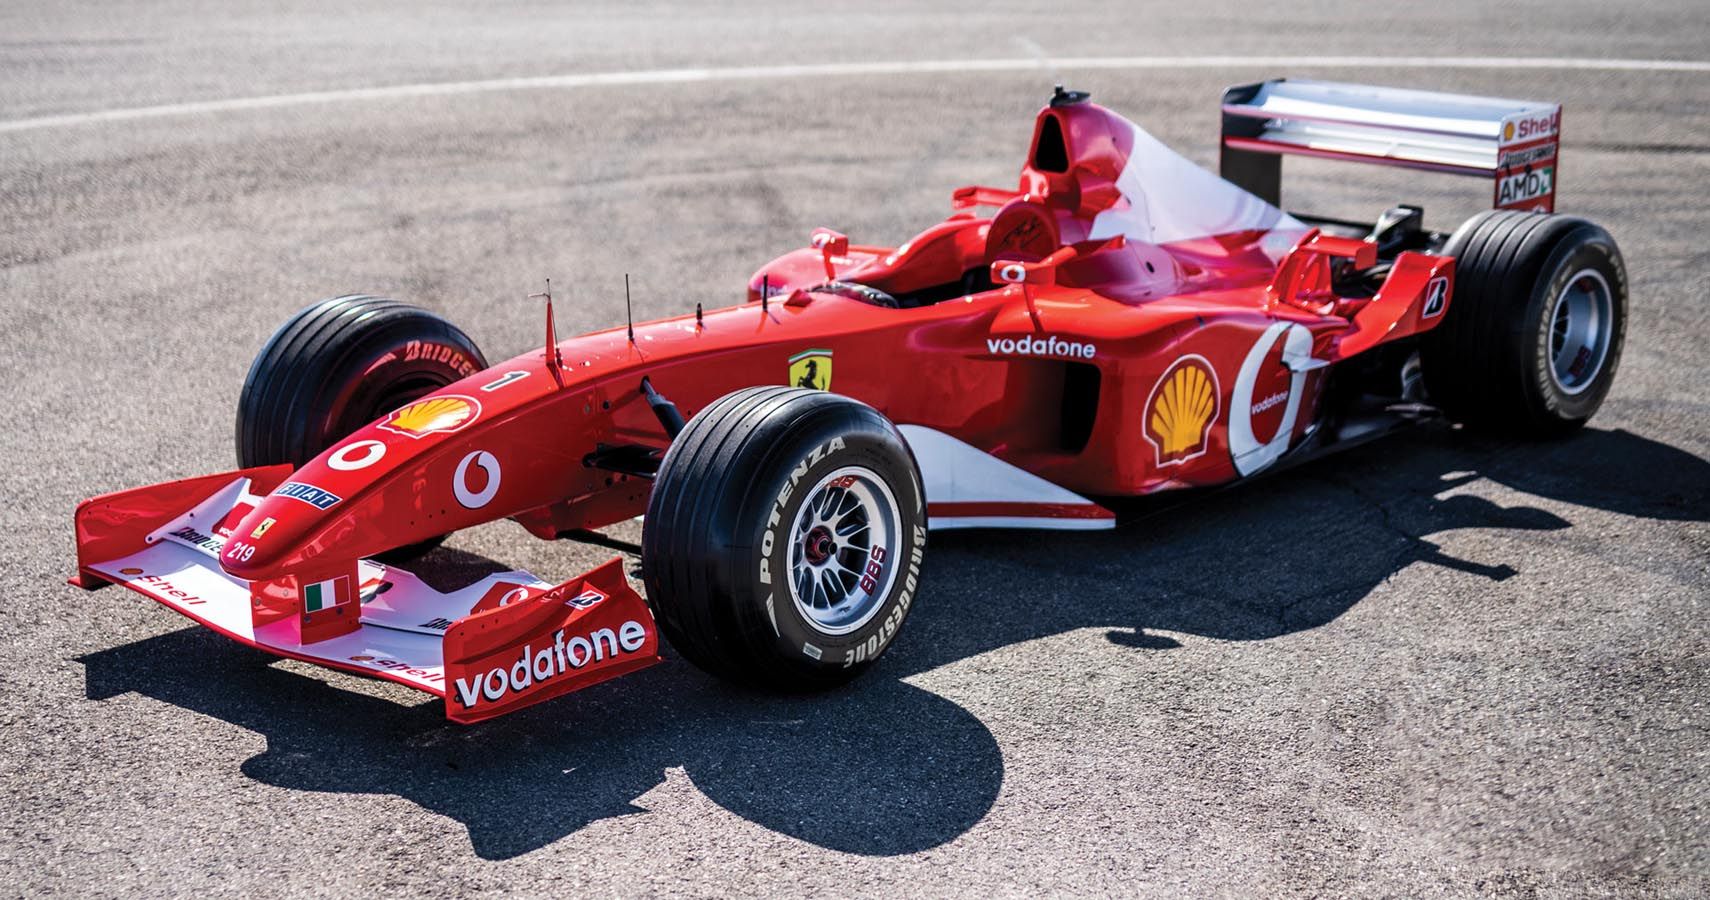 The Ferrari F2002 came powered by the 3.0-liter V10 engine